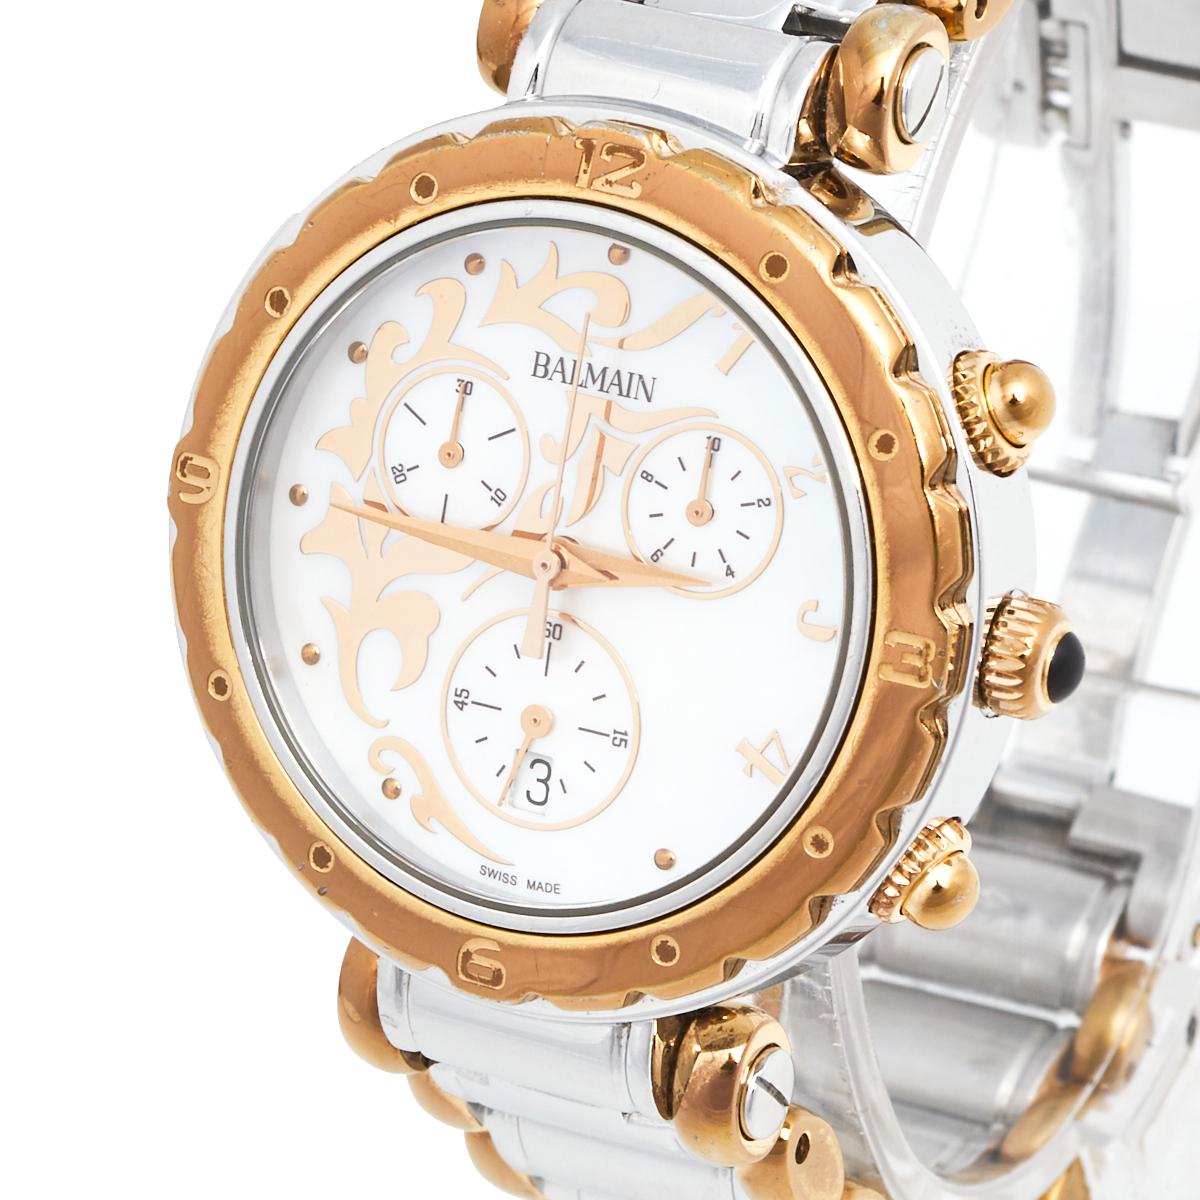 From the Balmania collection of Balmain comes this elegant chronograph watch which is rendered in stainless steel. It has a stylishly carved gold-plated steel bezel that features a round dial detailed with hour markers, three hands, a date window at